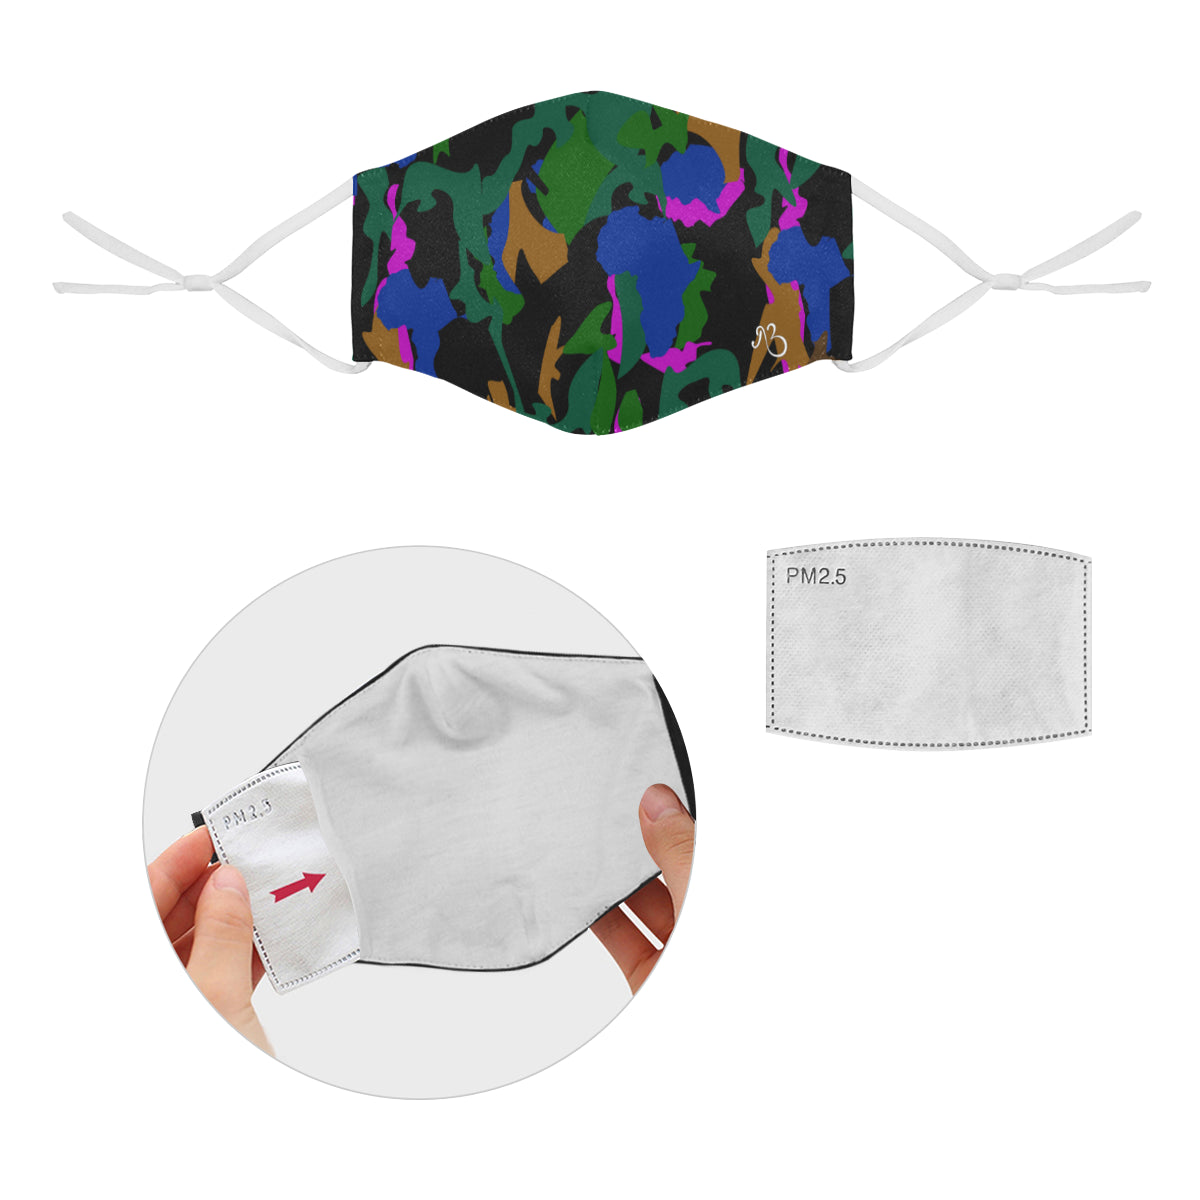 flyersetcinc Camo Print Cotton Fabric Face Mask with Filter Slot & Adjustable Strap - Non-medical use (2 Filters Included)